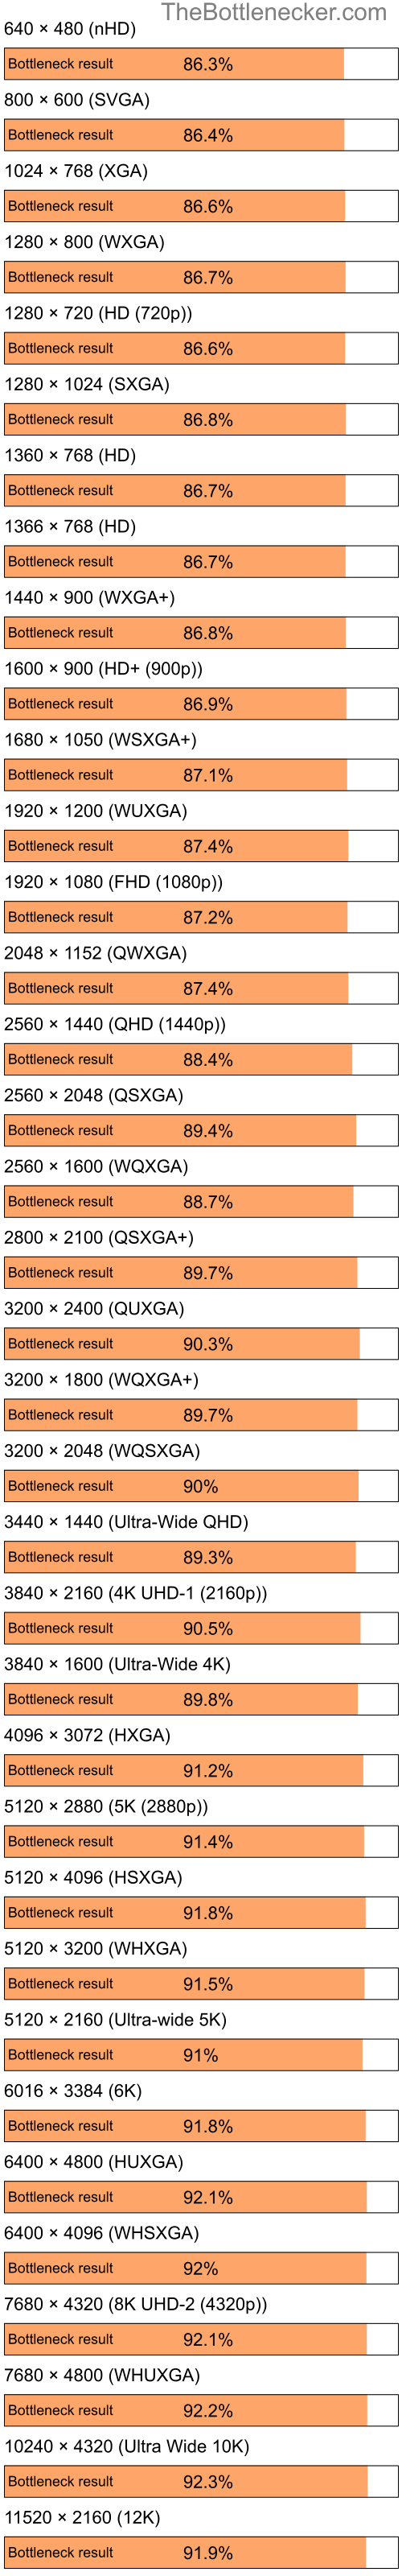 Bottleneck results by resolution for Intel Pentium 4 and AMD Mobility Radeon 9000 in Processor Intense Tasks